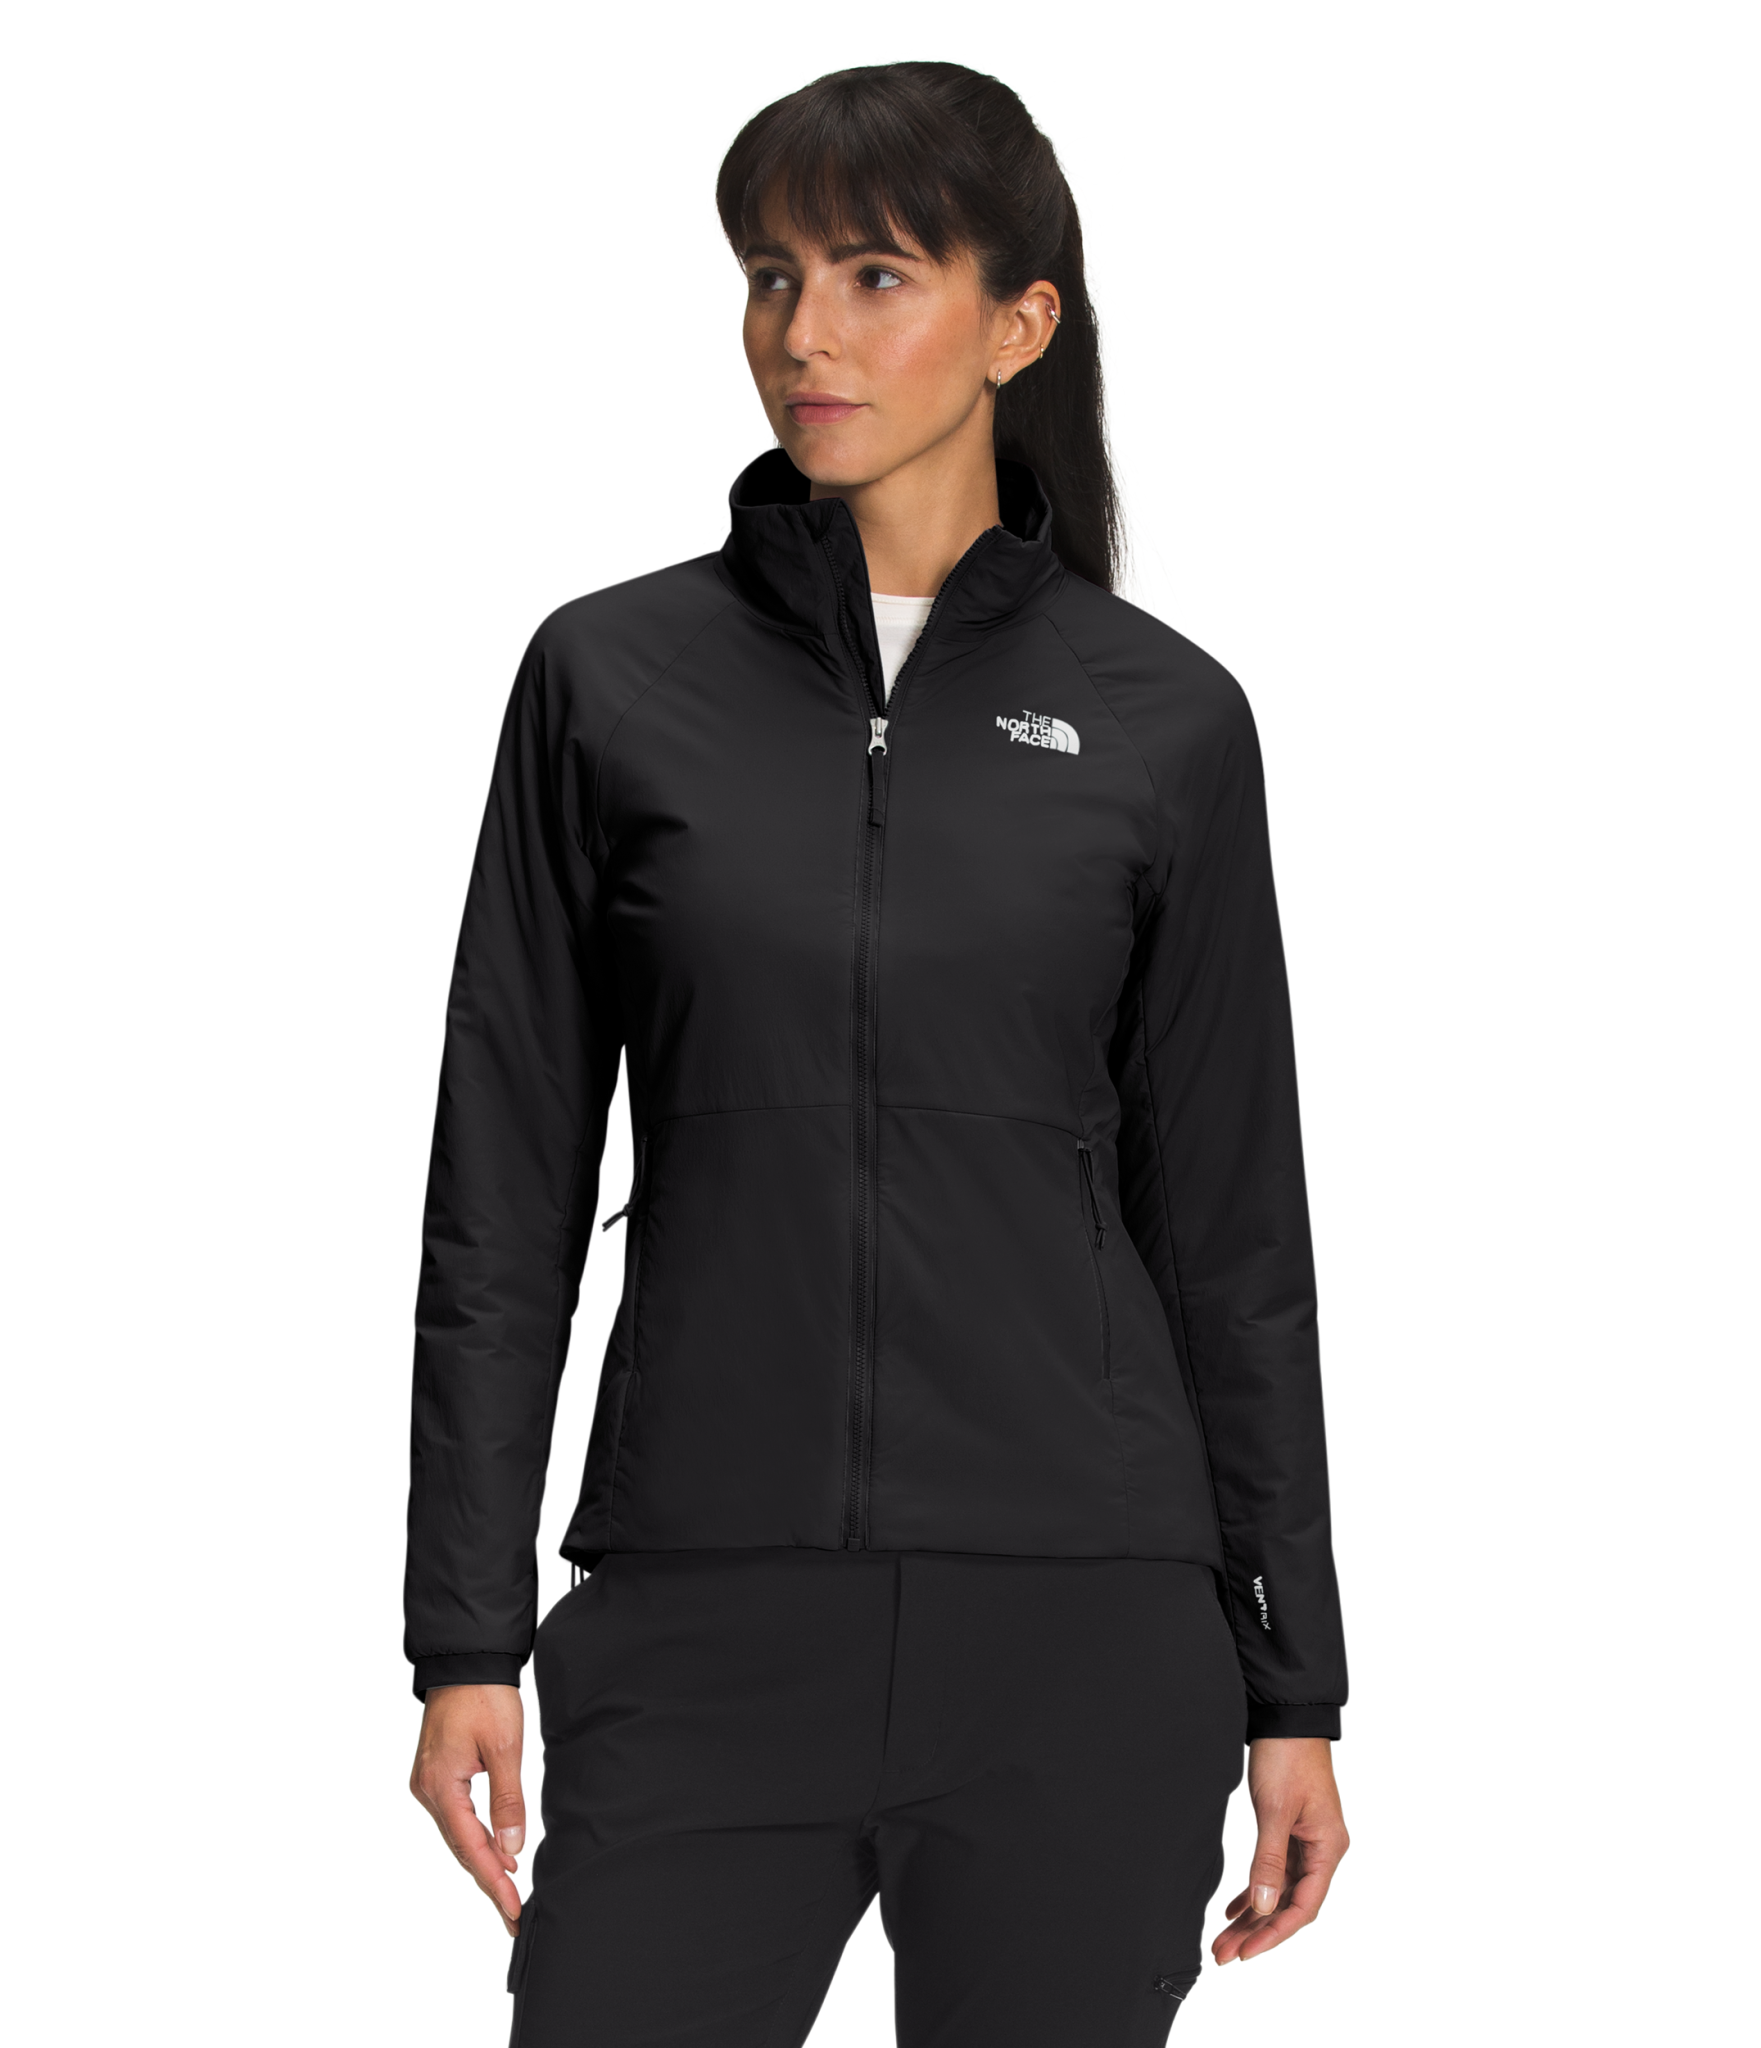 The North Face Ventrix Full Zip Jacket W